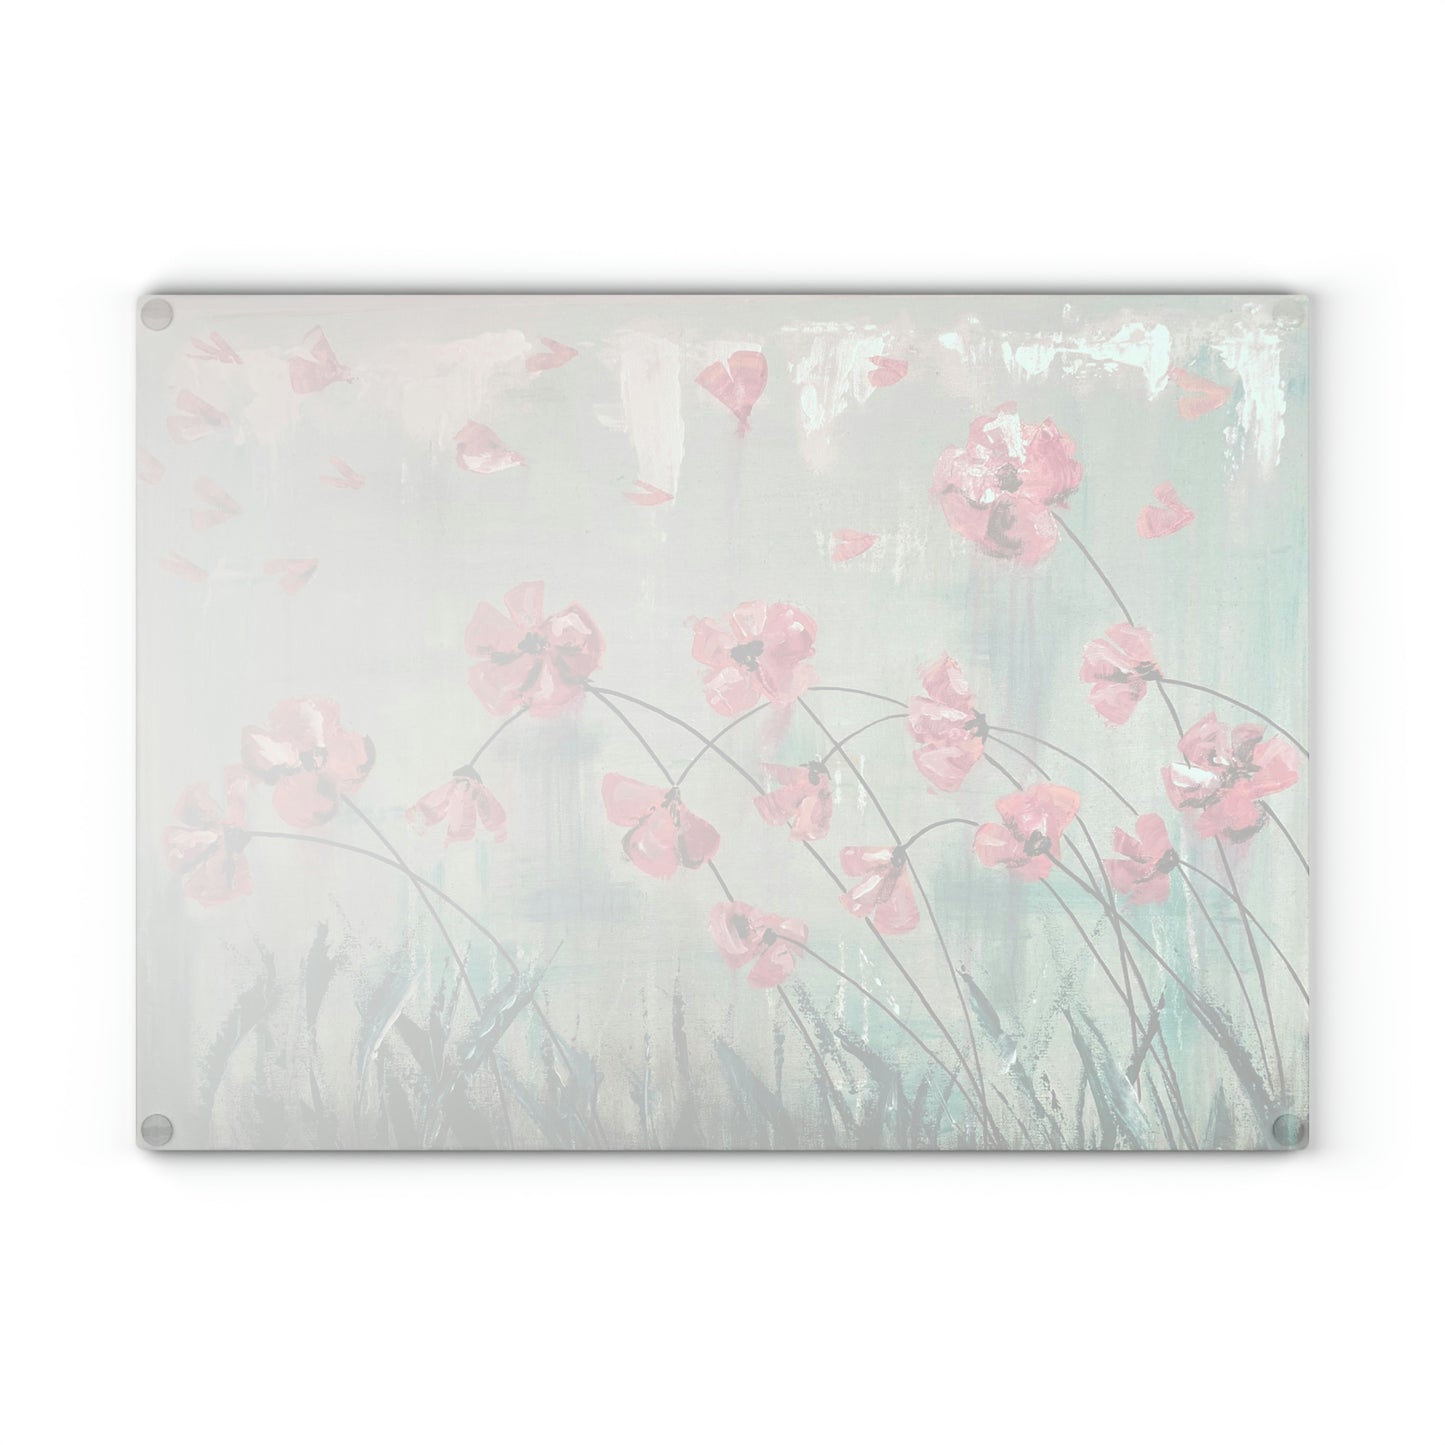 Glass Cutting Board - Pink Flowers Candice Griffy Original